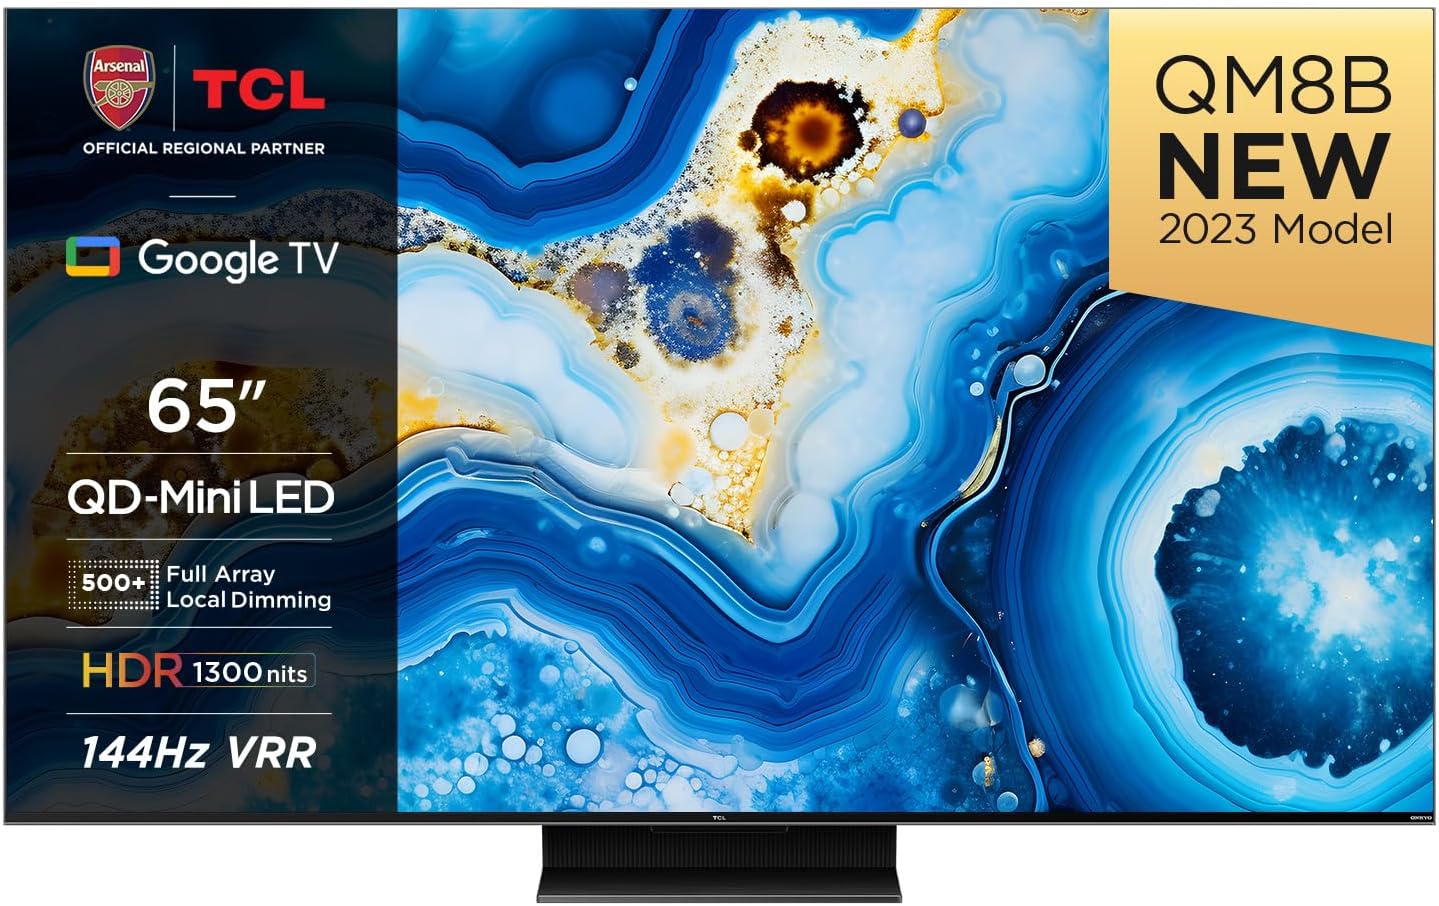 TCL 55QM8B 55 - inch QLED Mini LED Smart TV, 4K HDR Premium 1300nits, Powered by Google TV (Dolby Vision & Atmos, Onkyo 2.0 sound system, 144Hz Motion Clarity Pro, Hands - Free Voice Control) - Amazing Gadgets Outlet